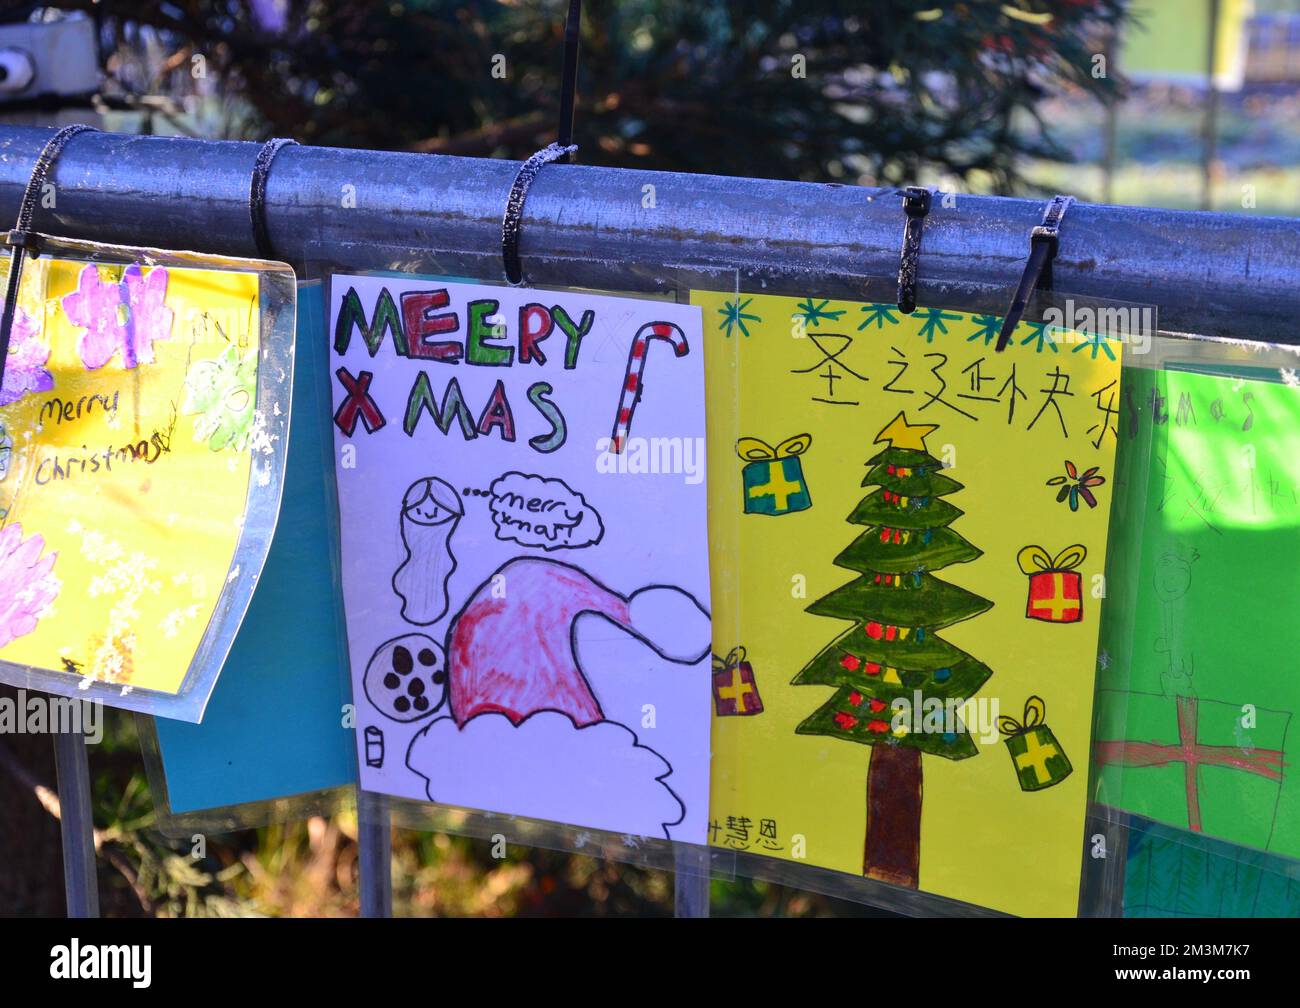 Manchester, UK, 16th December, 2022. Delightful Christmas cards created by children on display beside an Xmas tree in Ardwick Green park, Manchester, UK. Credit: Terry Waller/Alamy Live News Stock Photo